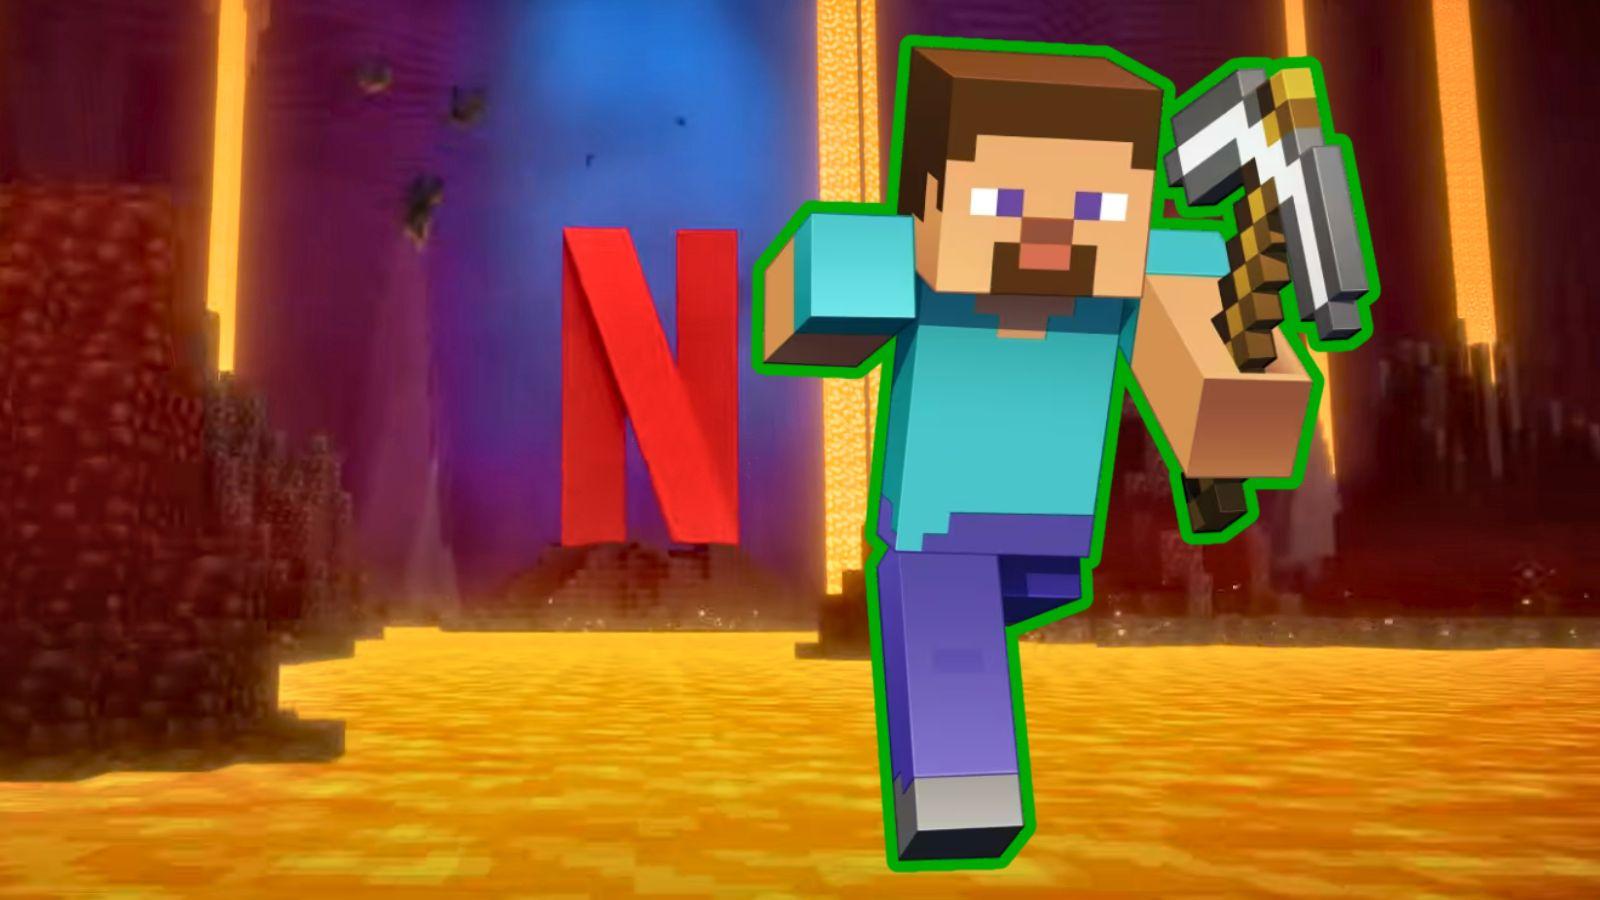 A Minecraft character in front of the Netflix logo.